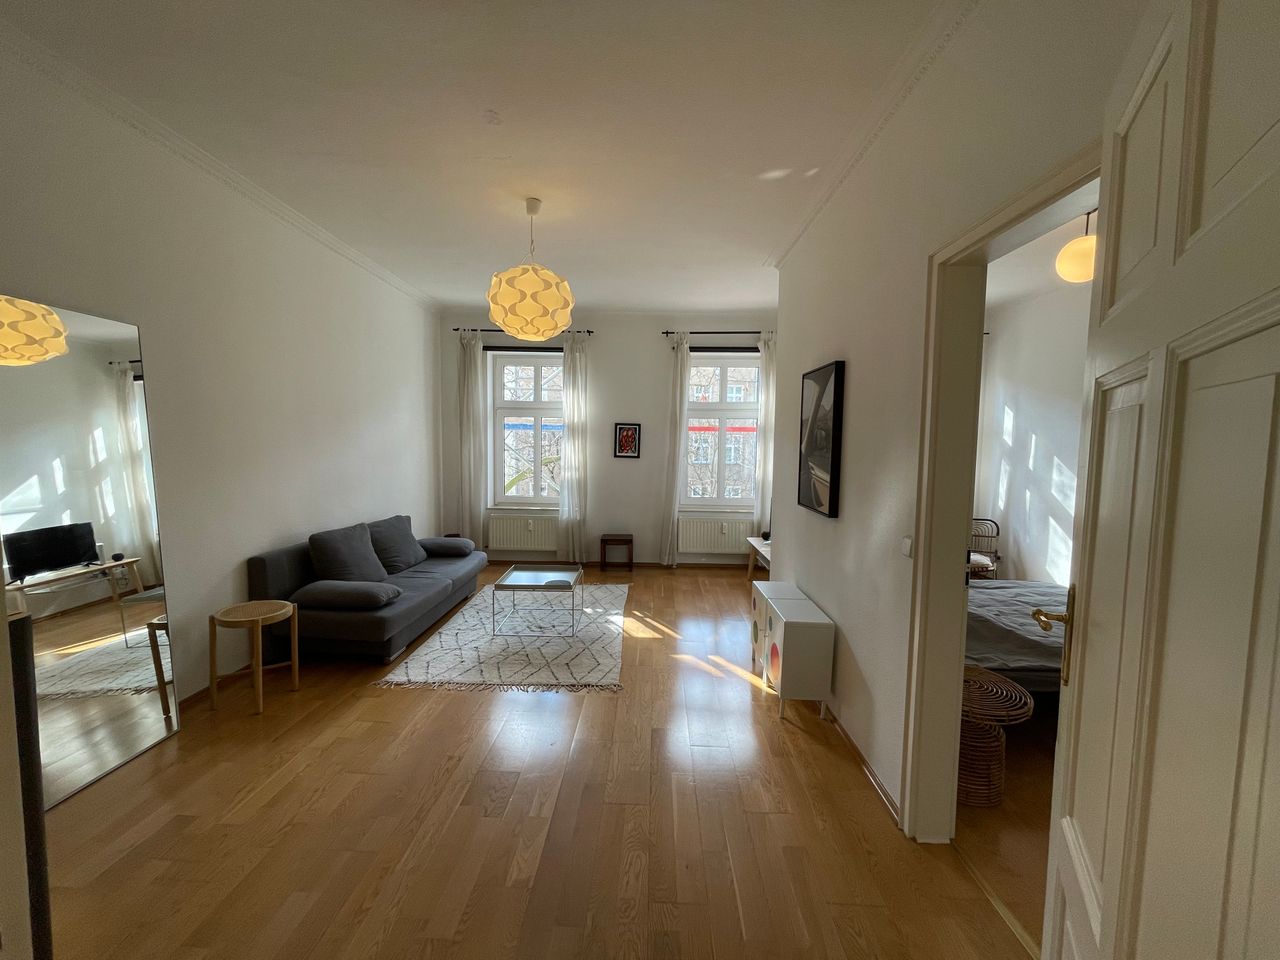 Top Location Zionskirchplatz/Mitte, Cosy bright apartment with balcony and elevator